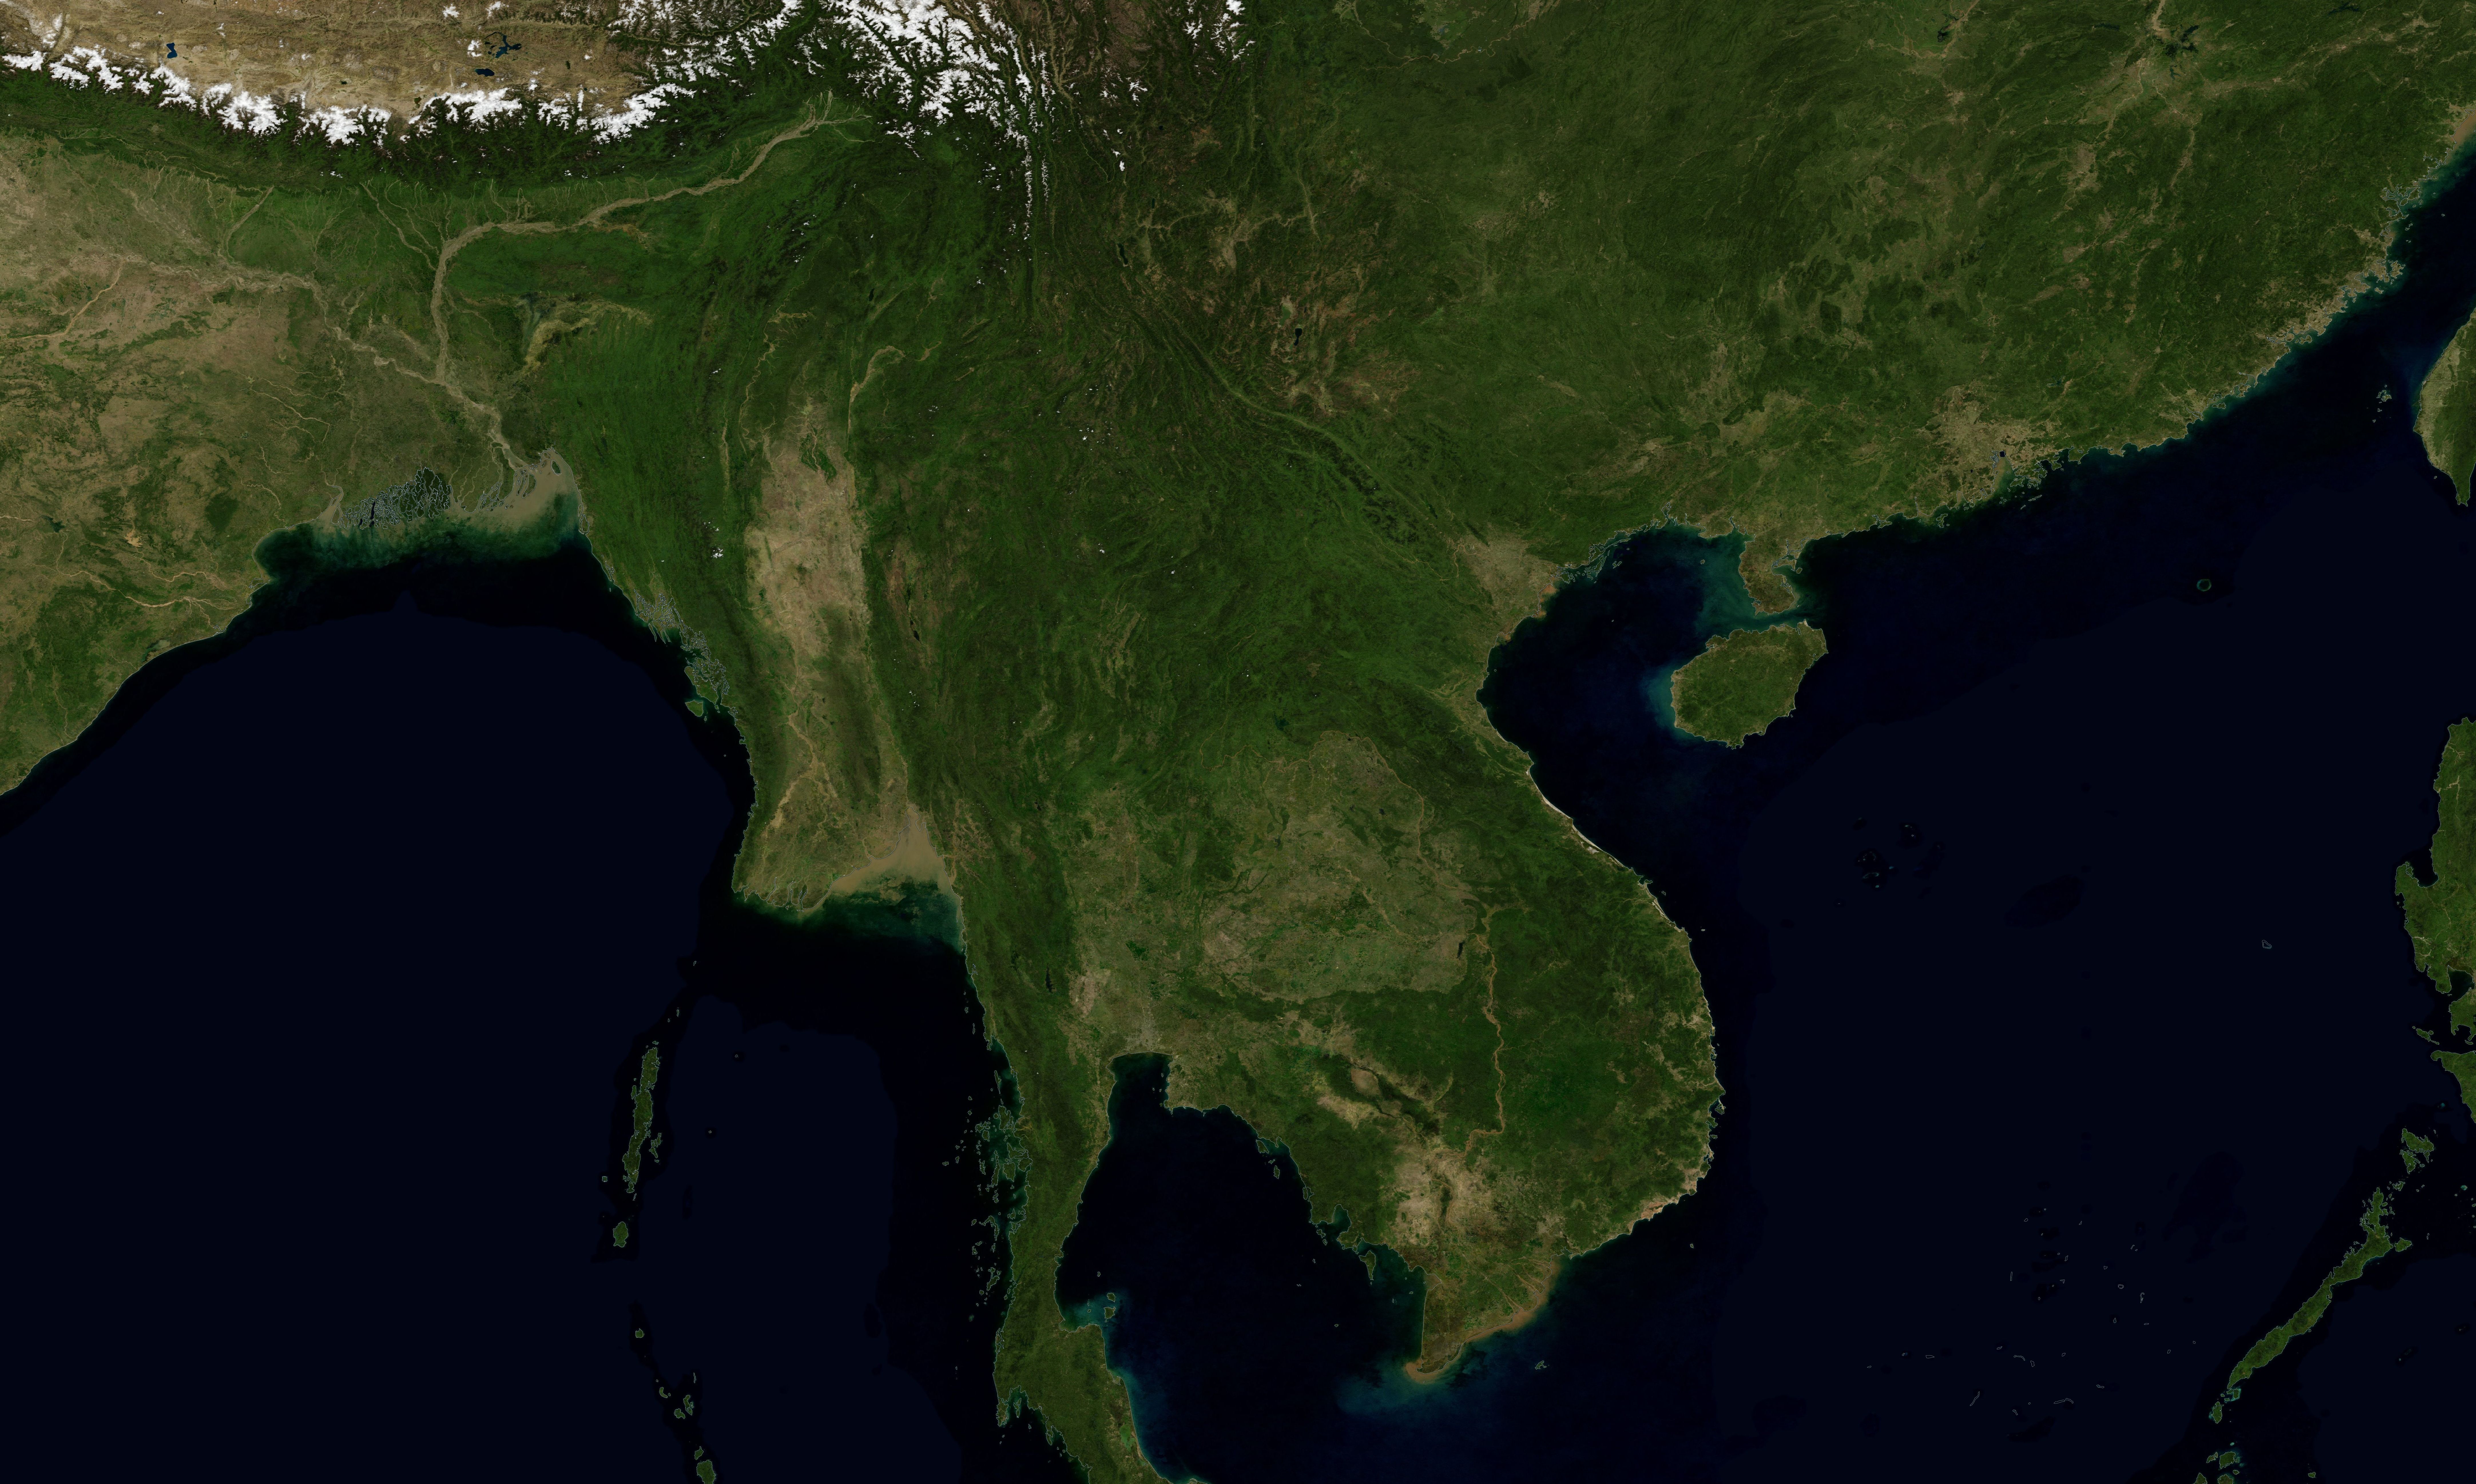 A satellite-based rendering of the Mekong River in Southeast Asia.